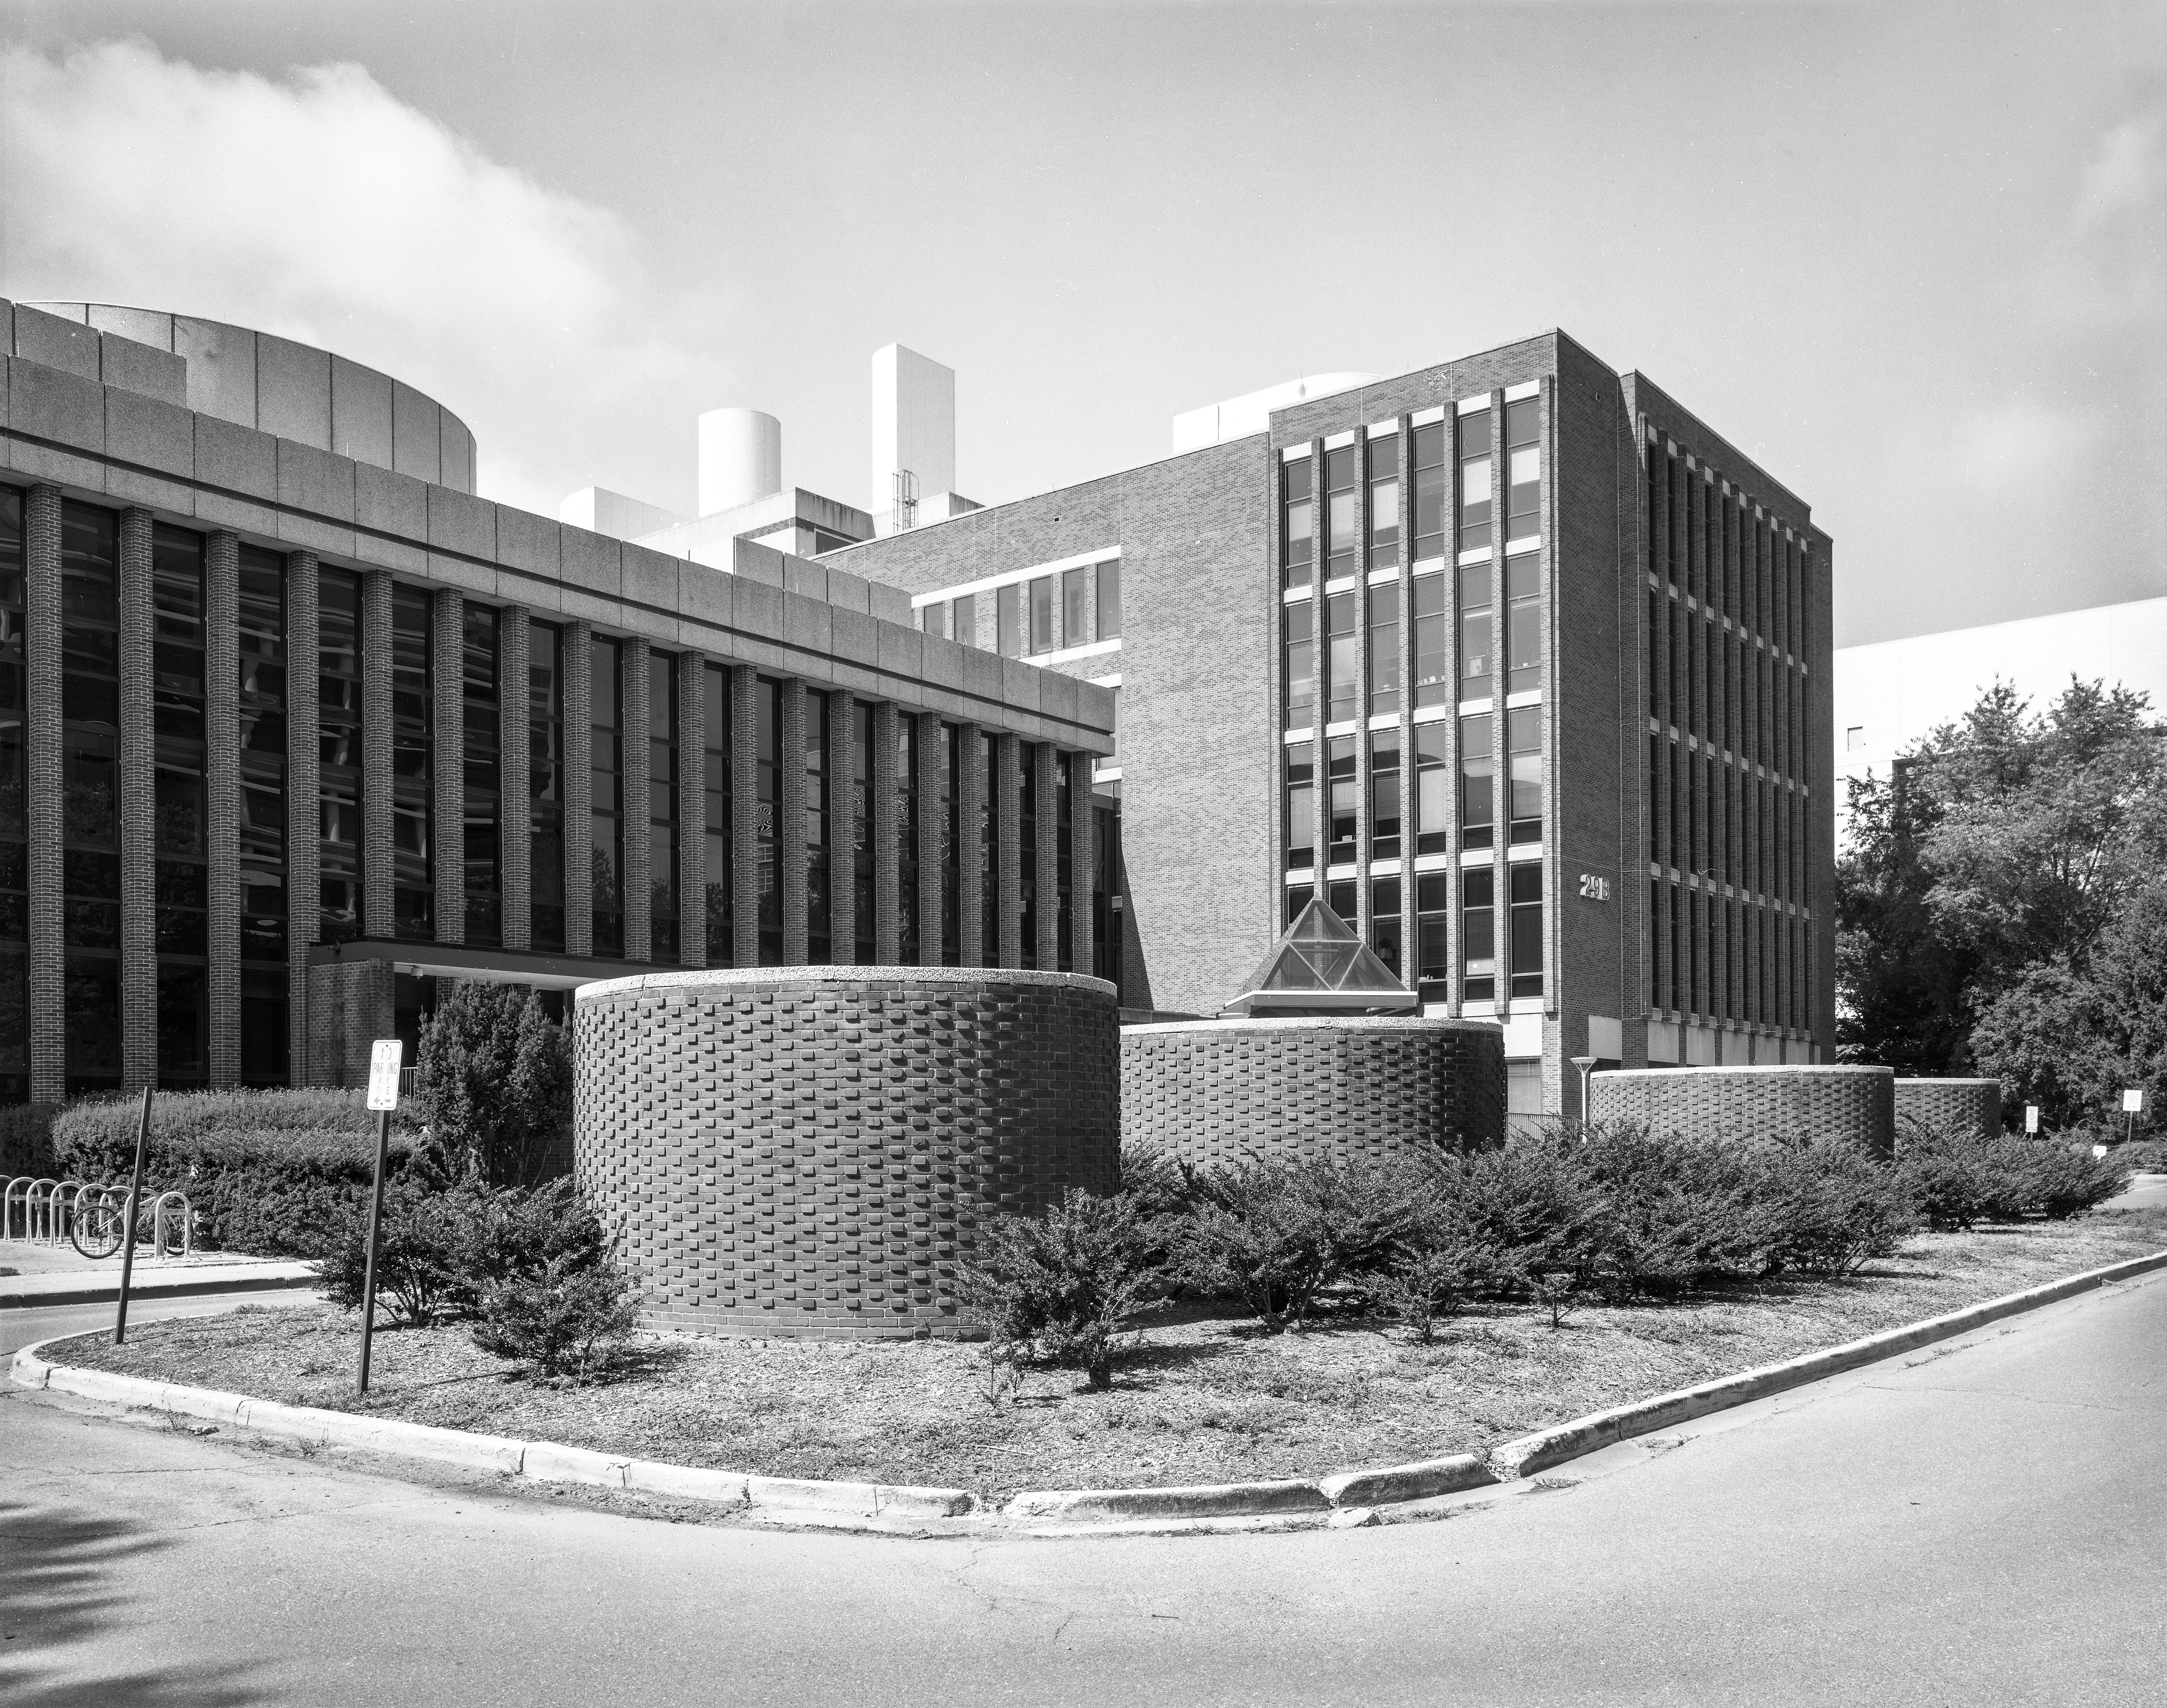 Air intake towers in center median in front of Building 29A, with Building 29B in the background in a HABS photo taken July 2021.